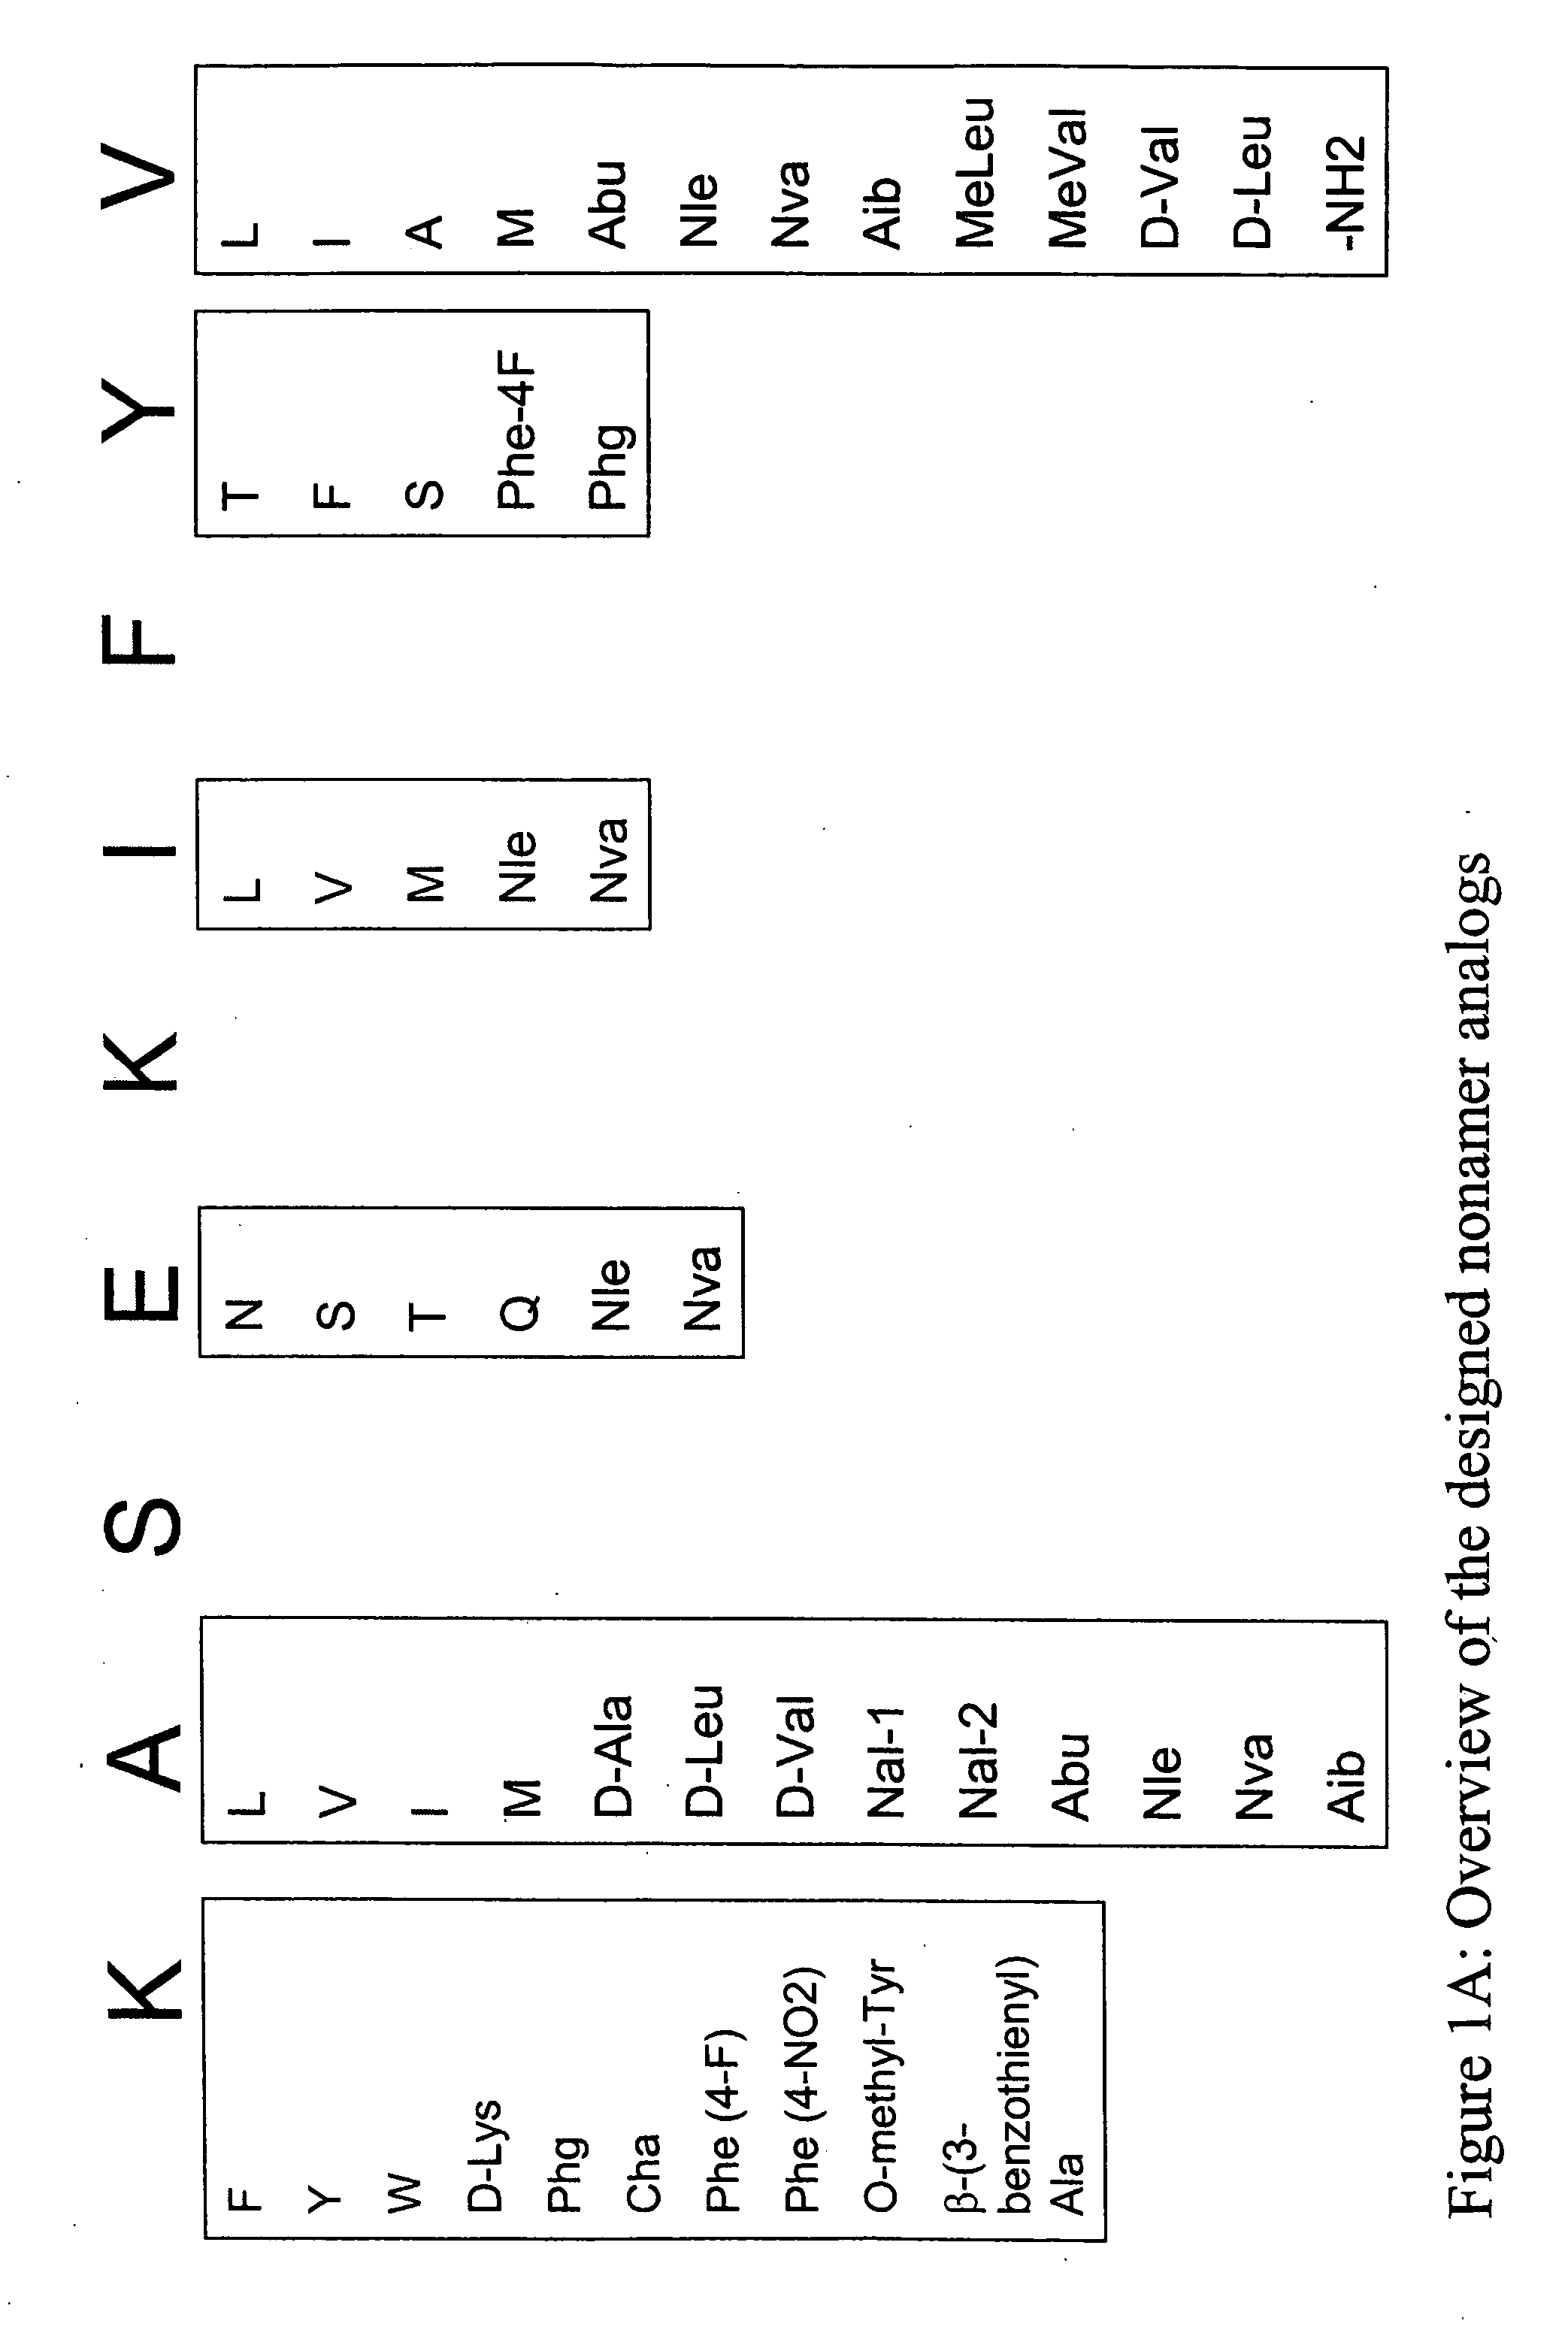 SSX-2 peptide analogs